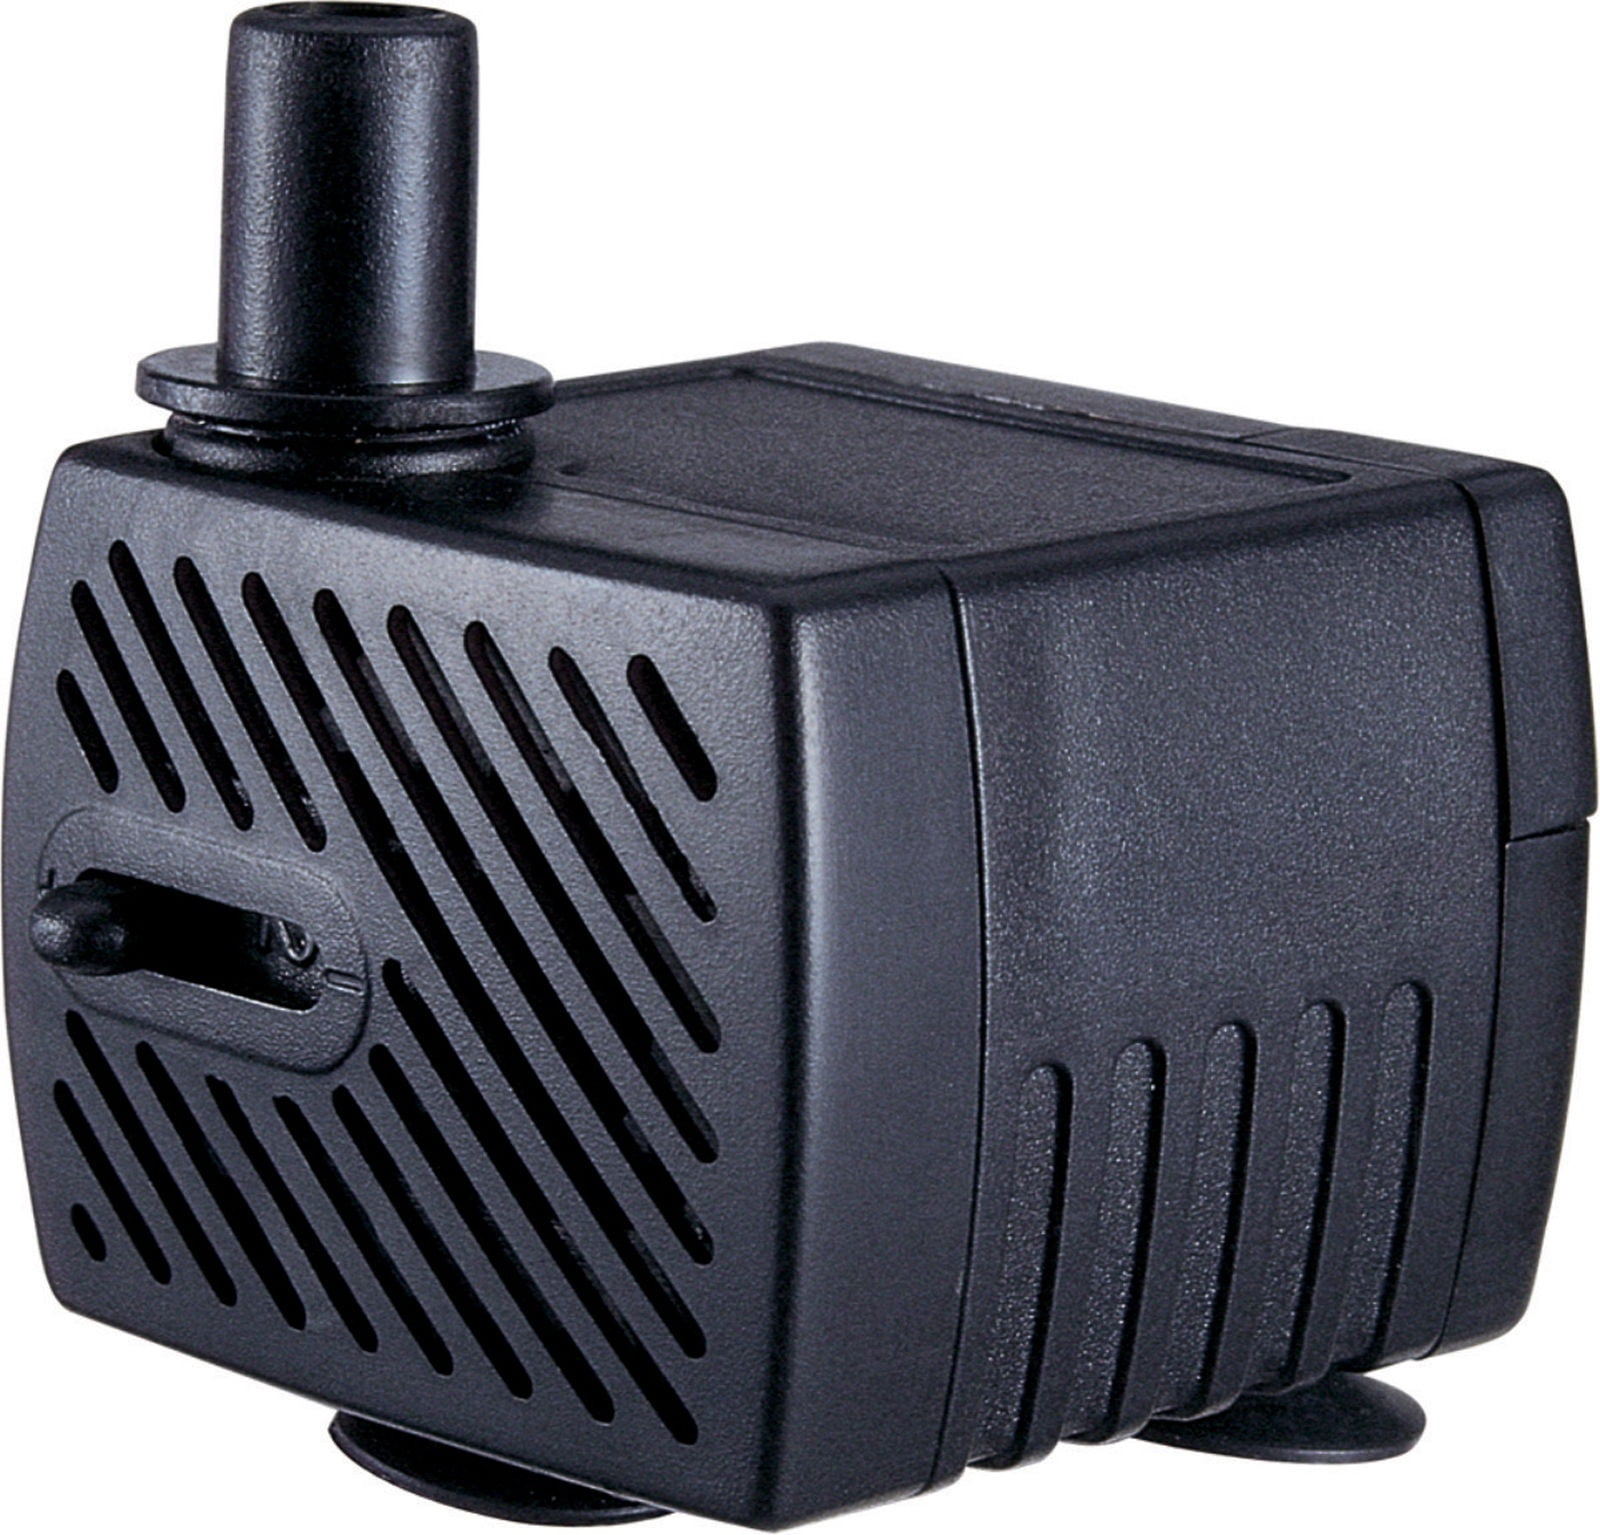 Jebao Multi Functional Mini Submersible Pump for Aquarium or Small Water Feature 